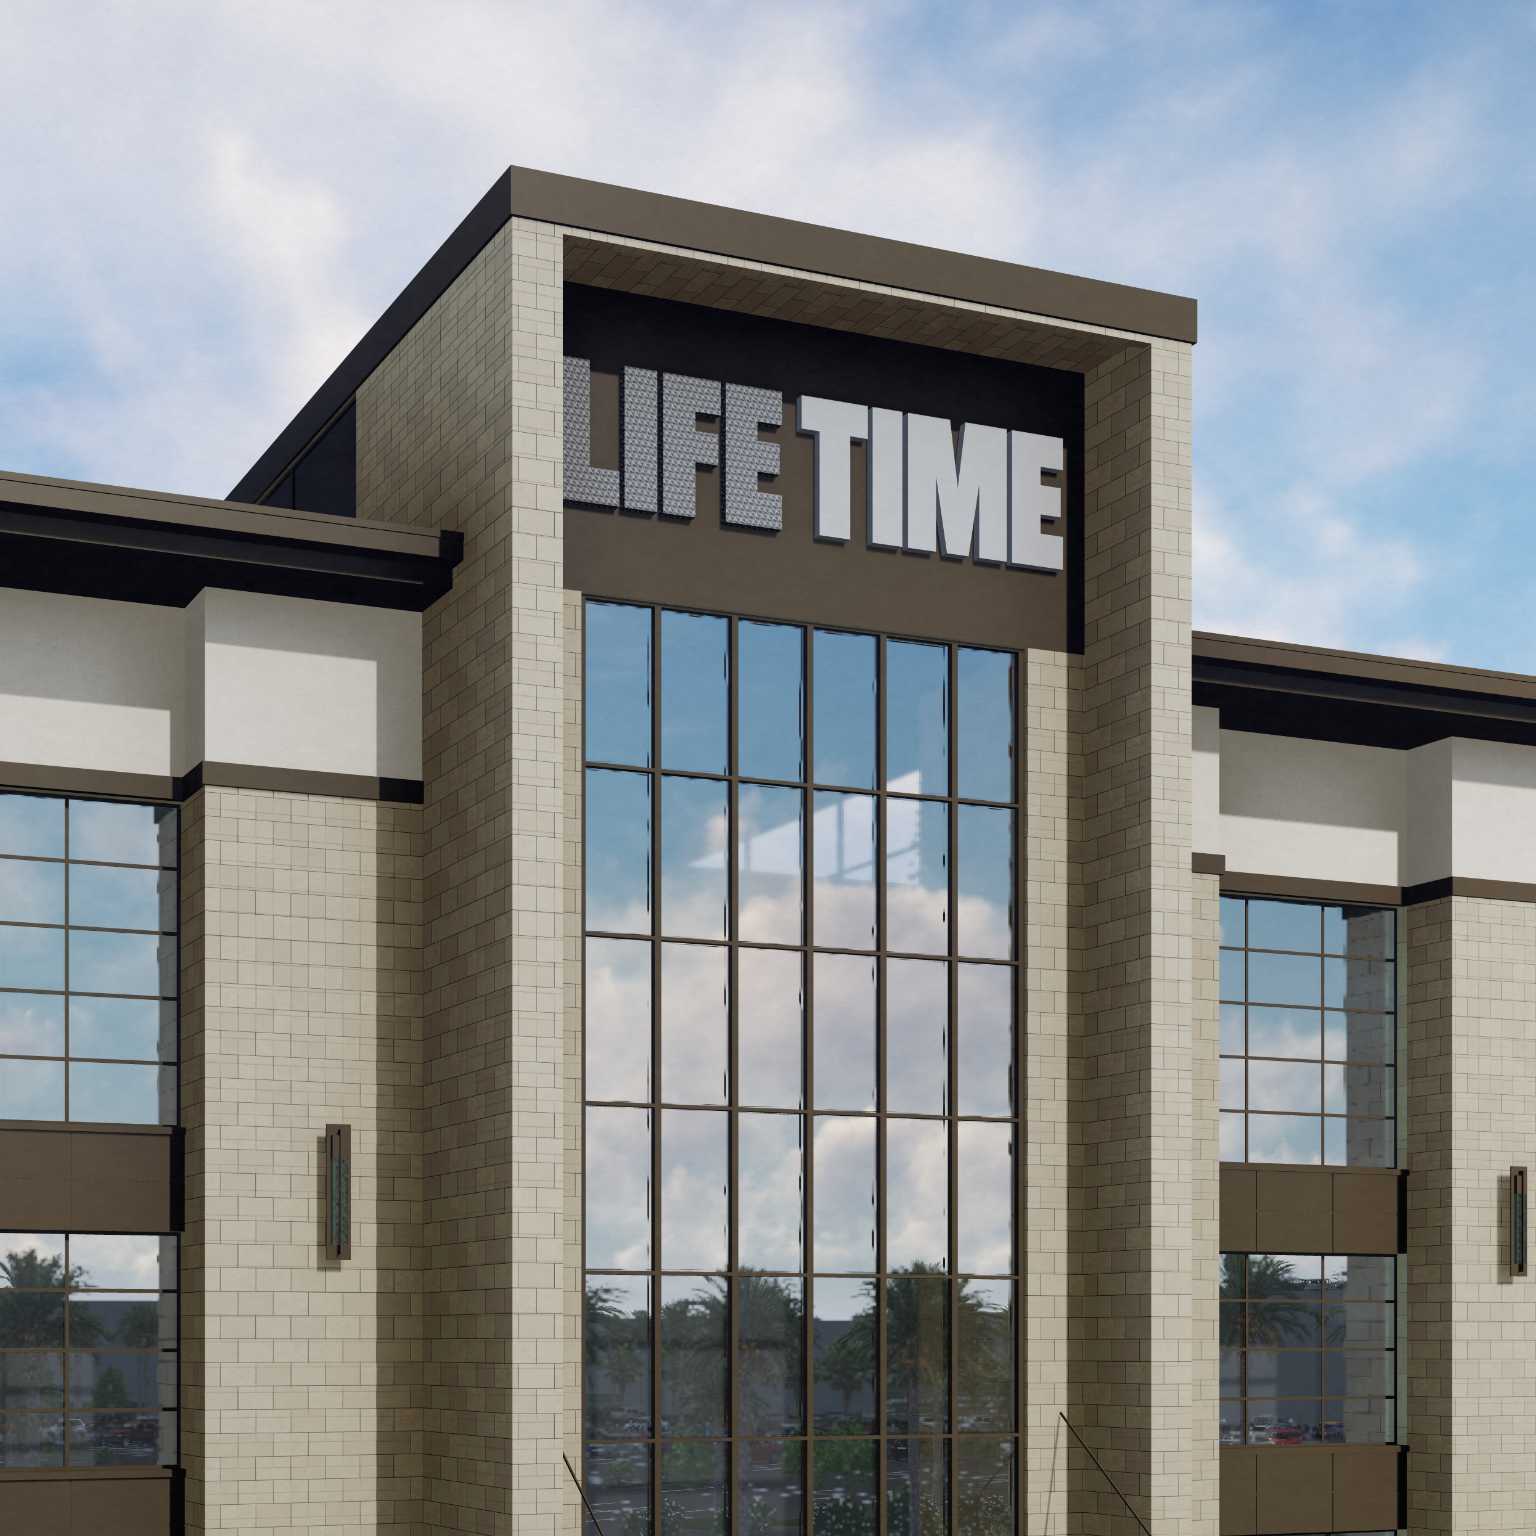 Exterior of a Life Time building.